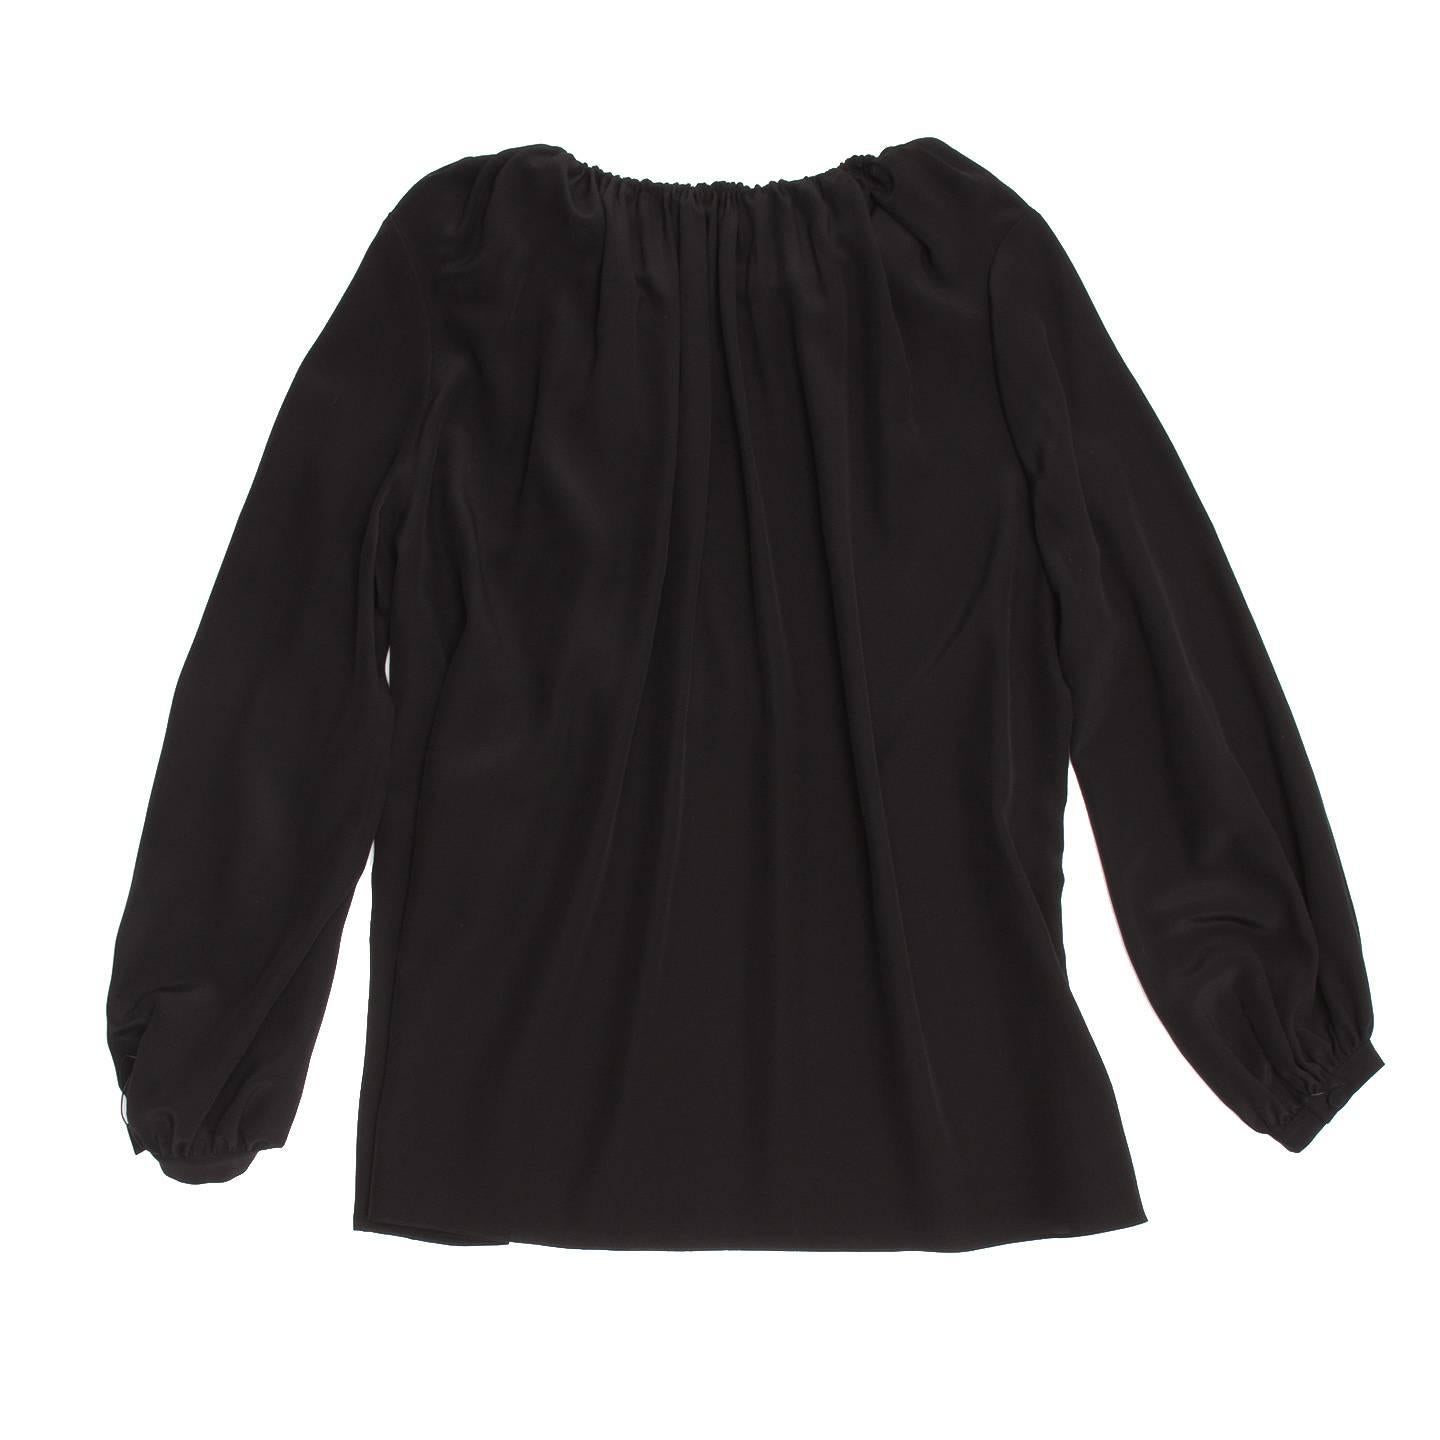 Saint Laurent Black Silk Peasant Style Top In New Condition For Sale In Brooklyn, NY